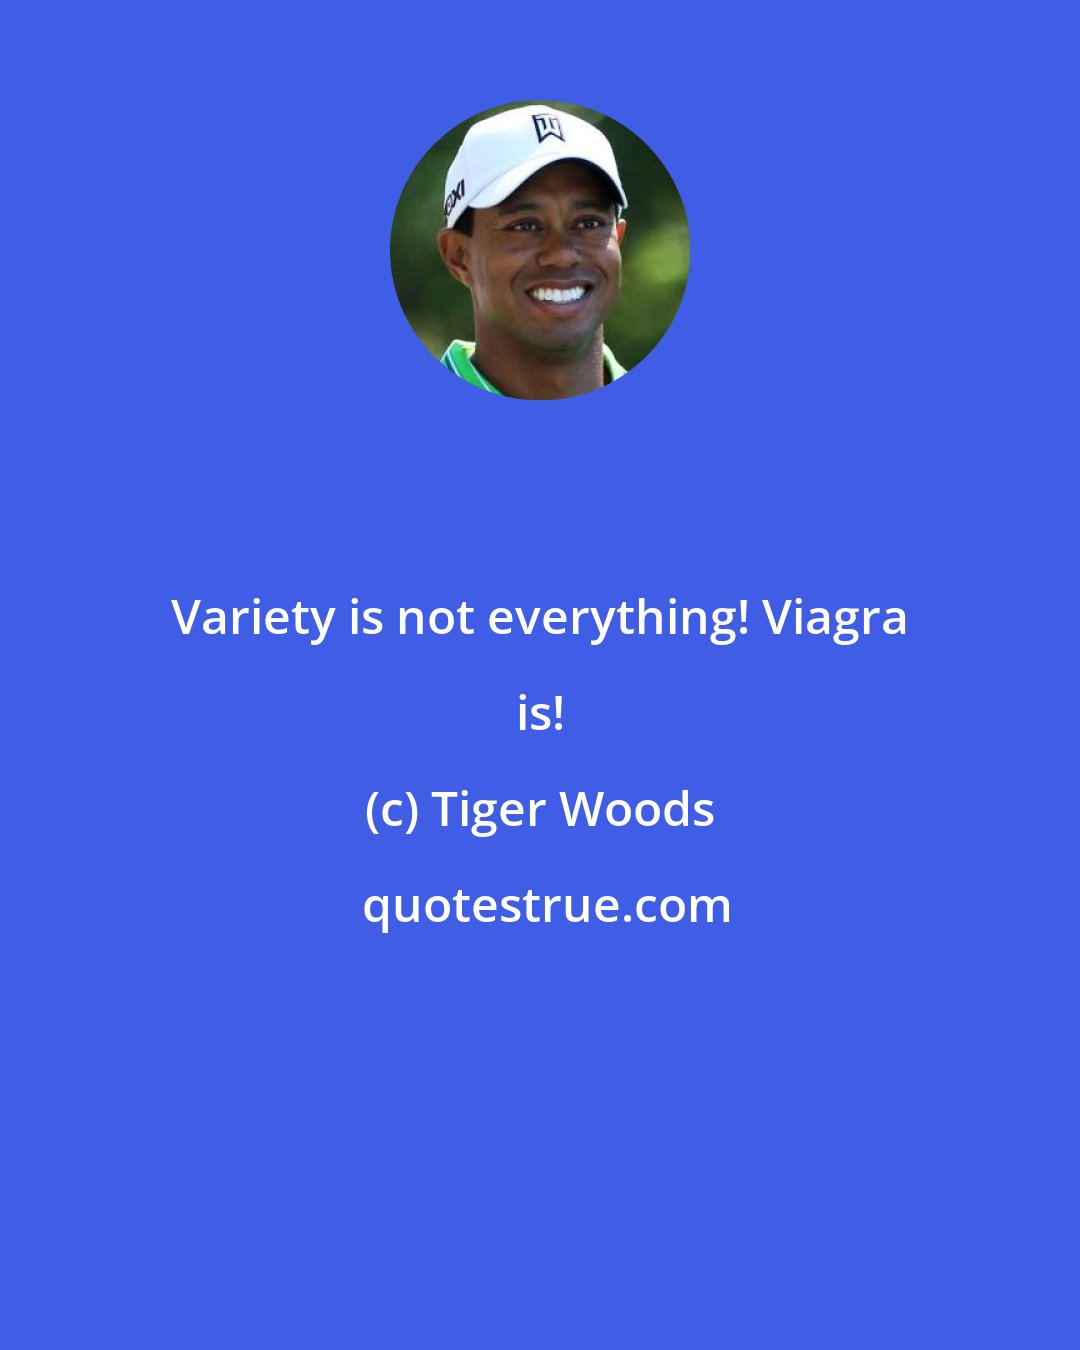 Tiger Woods: Variety is not everything! Viagra is!